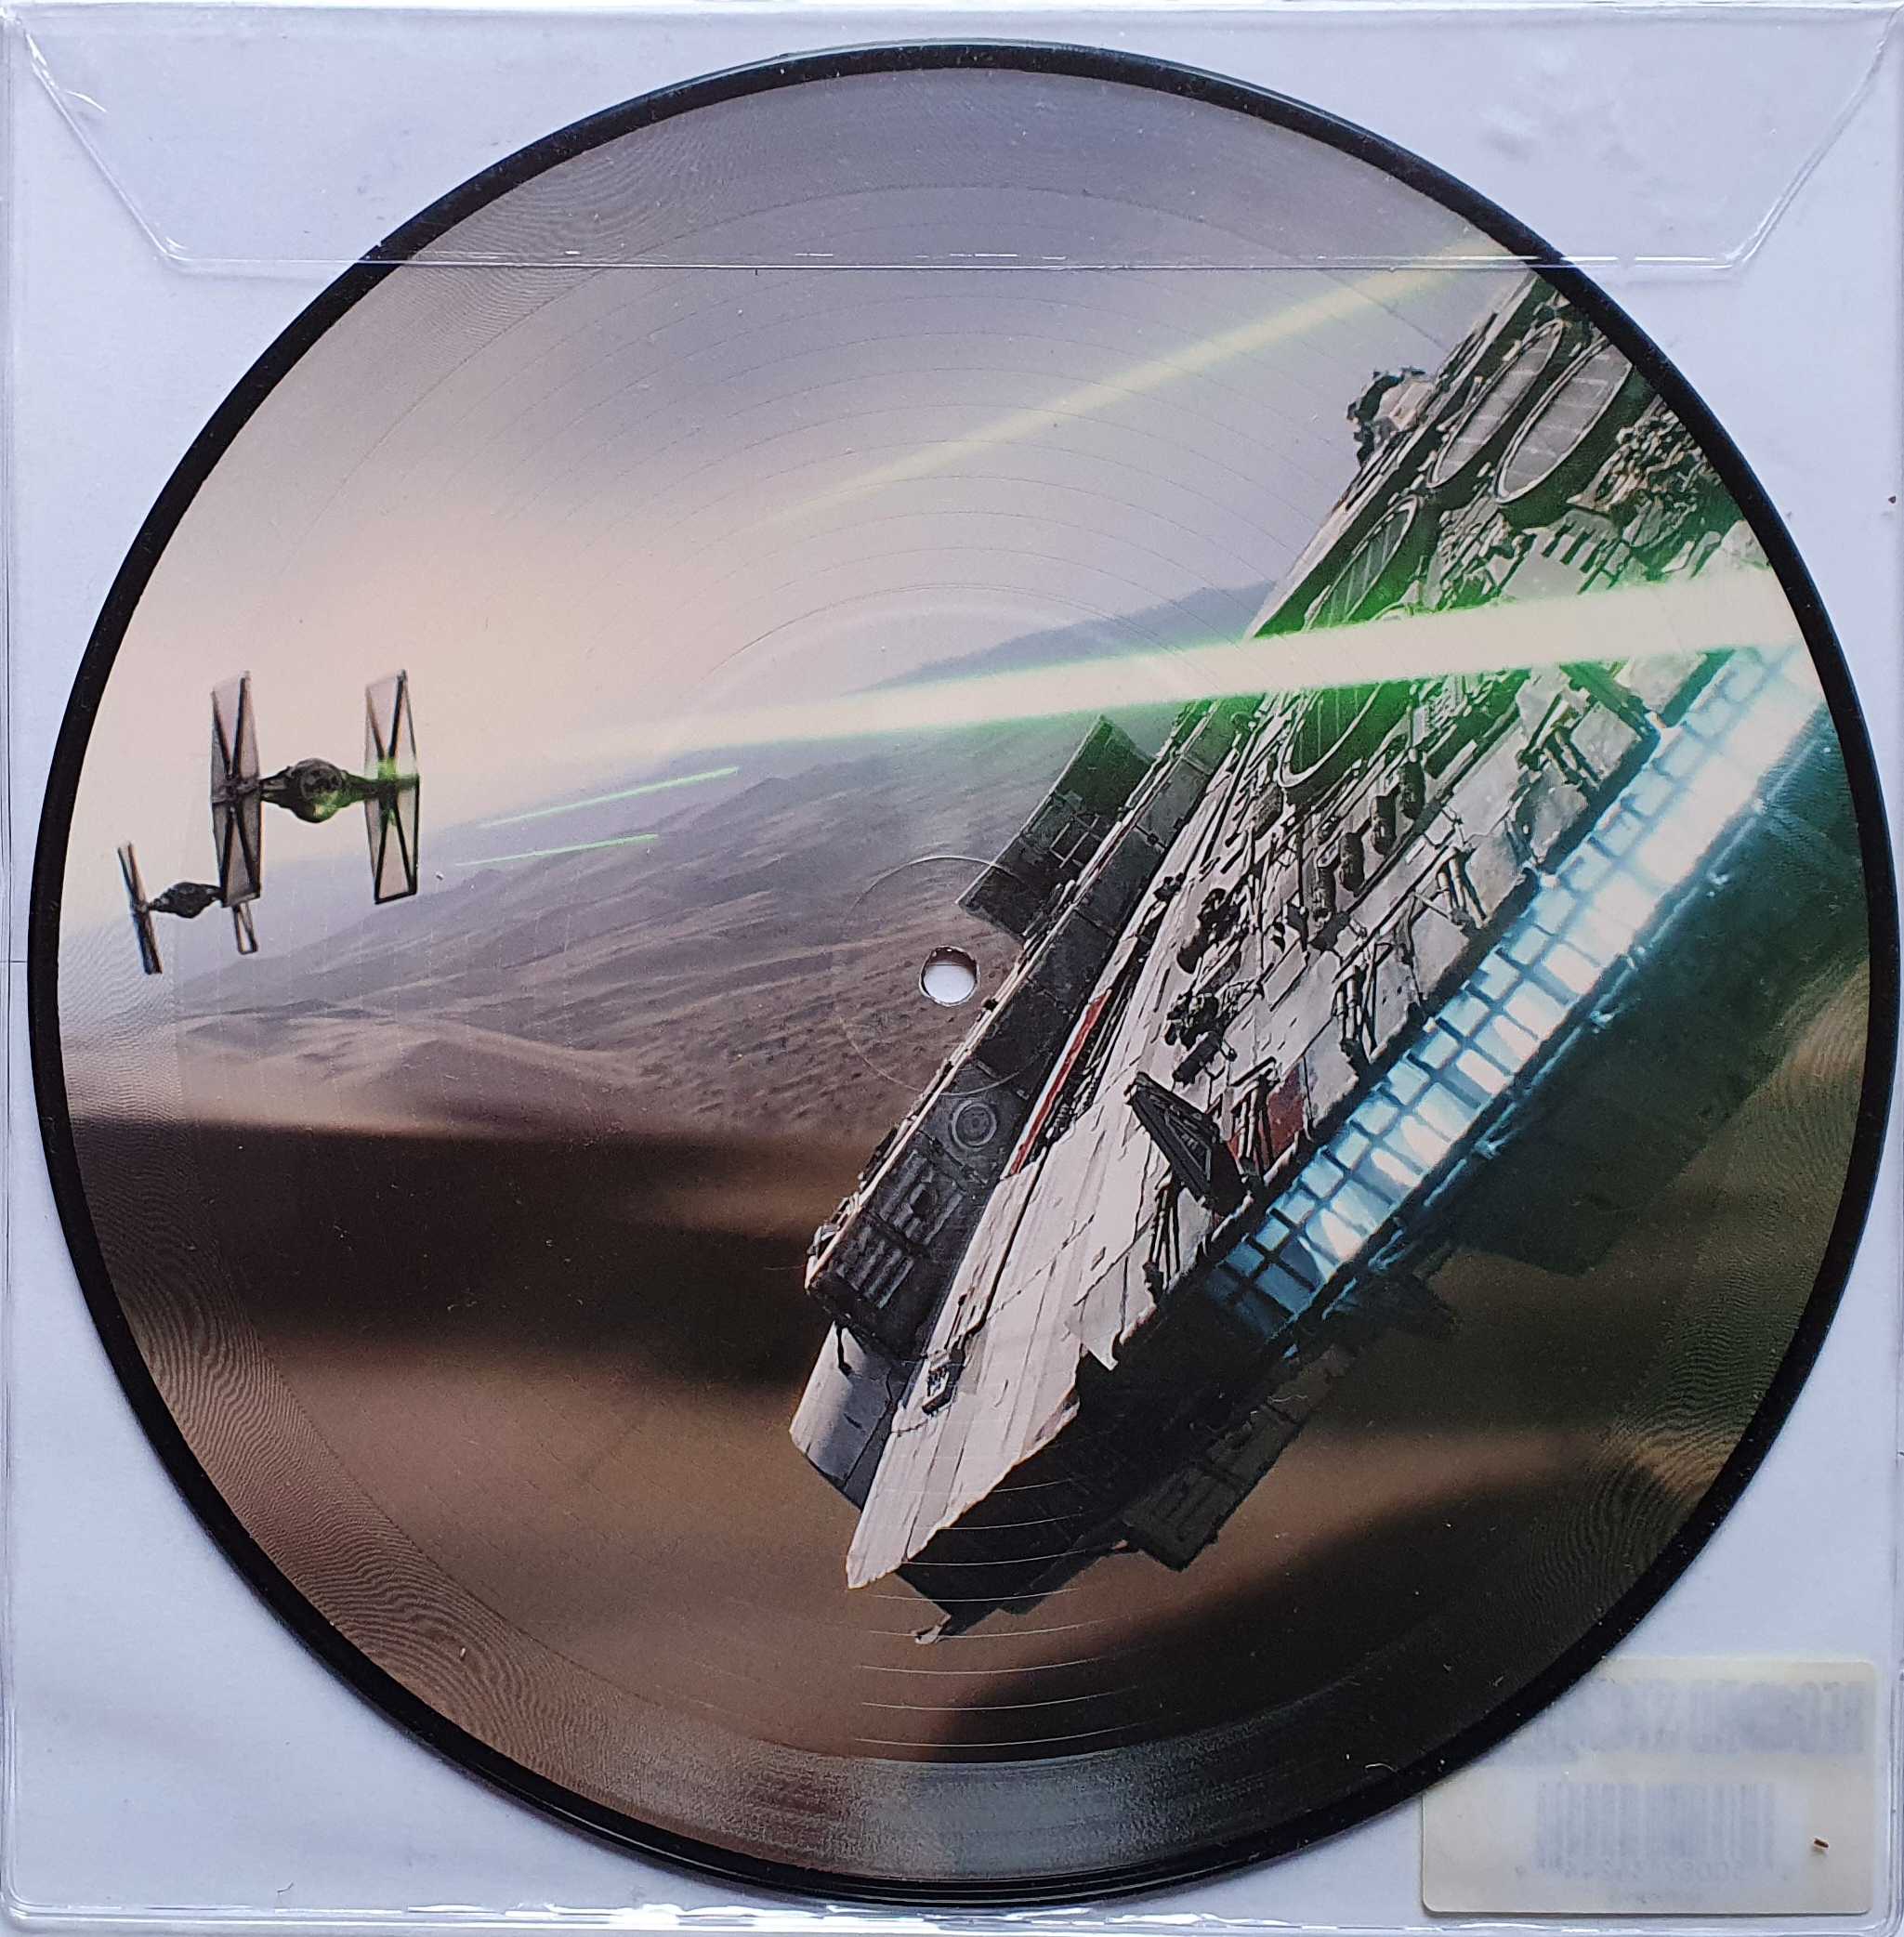 Picture of 00050087342449 Star Wars: The Force Awakens -  Record Store Day 2016 by artist John Williams from ITV, Channel 4 and Channel 5 library